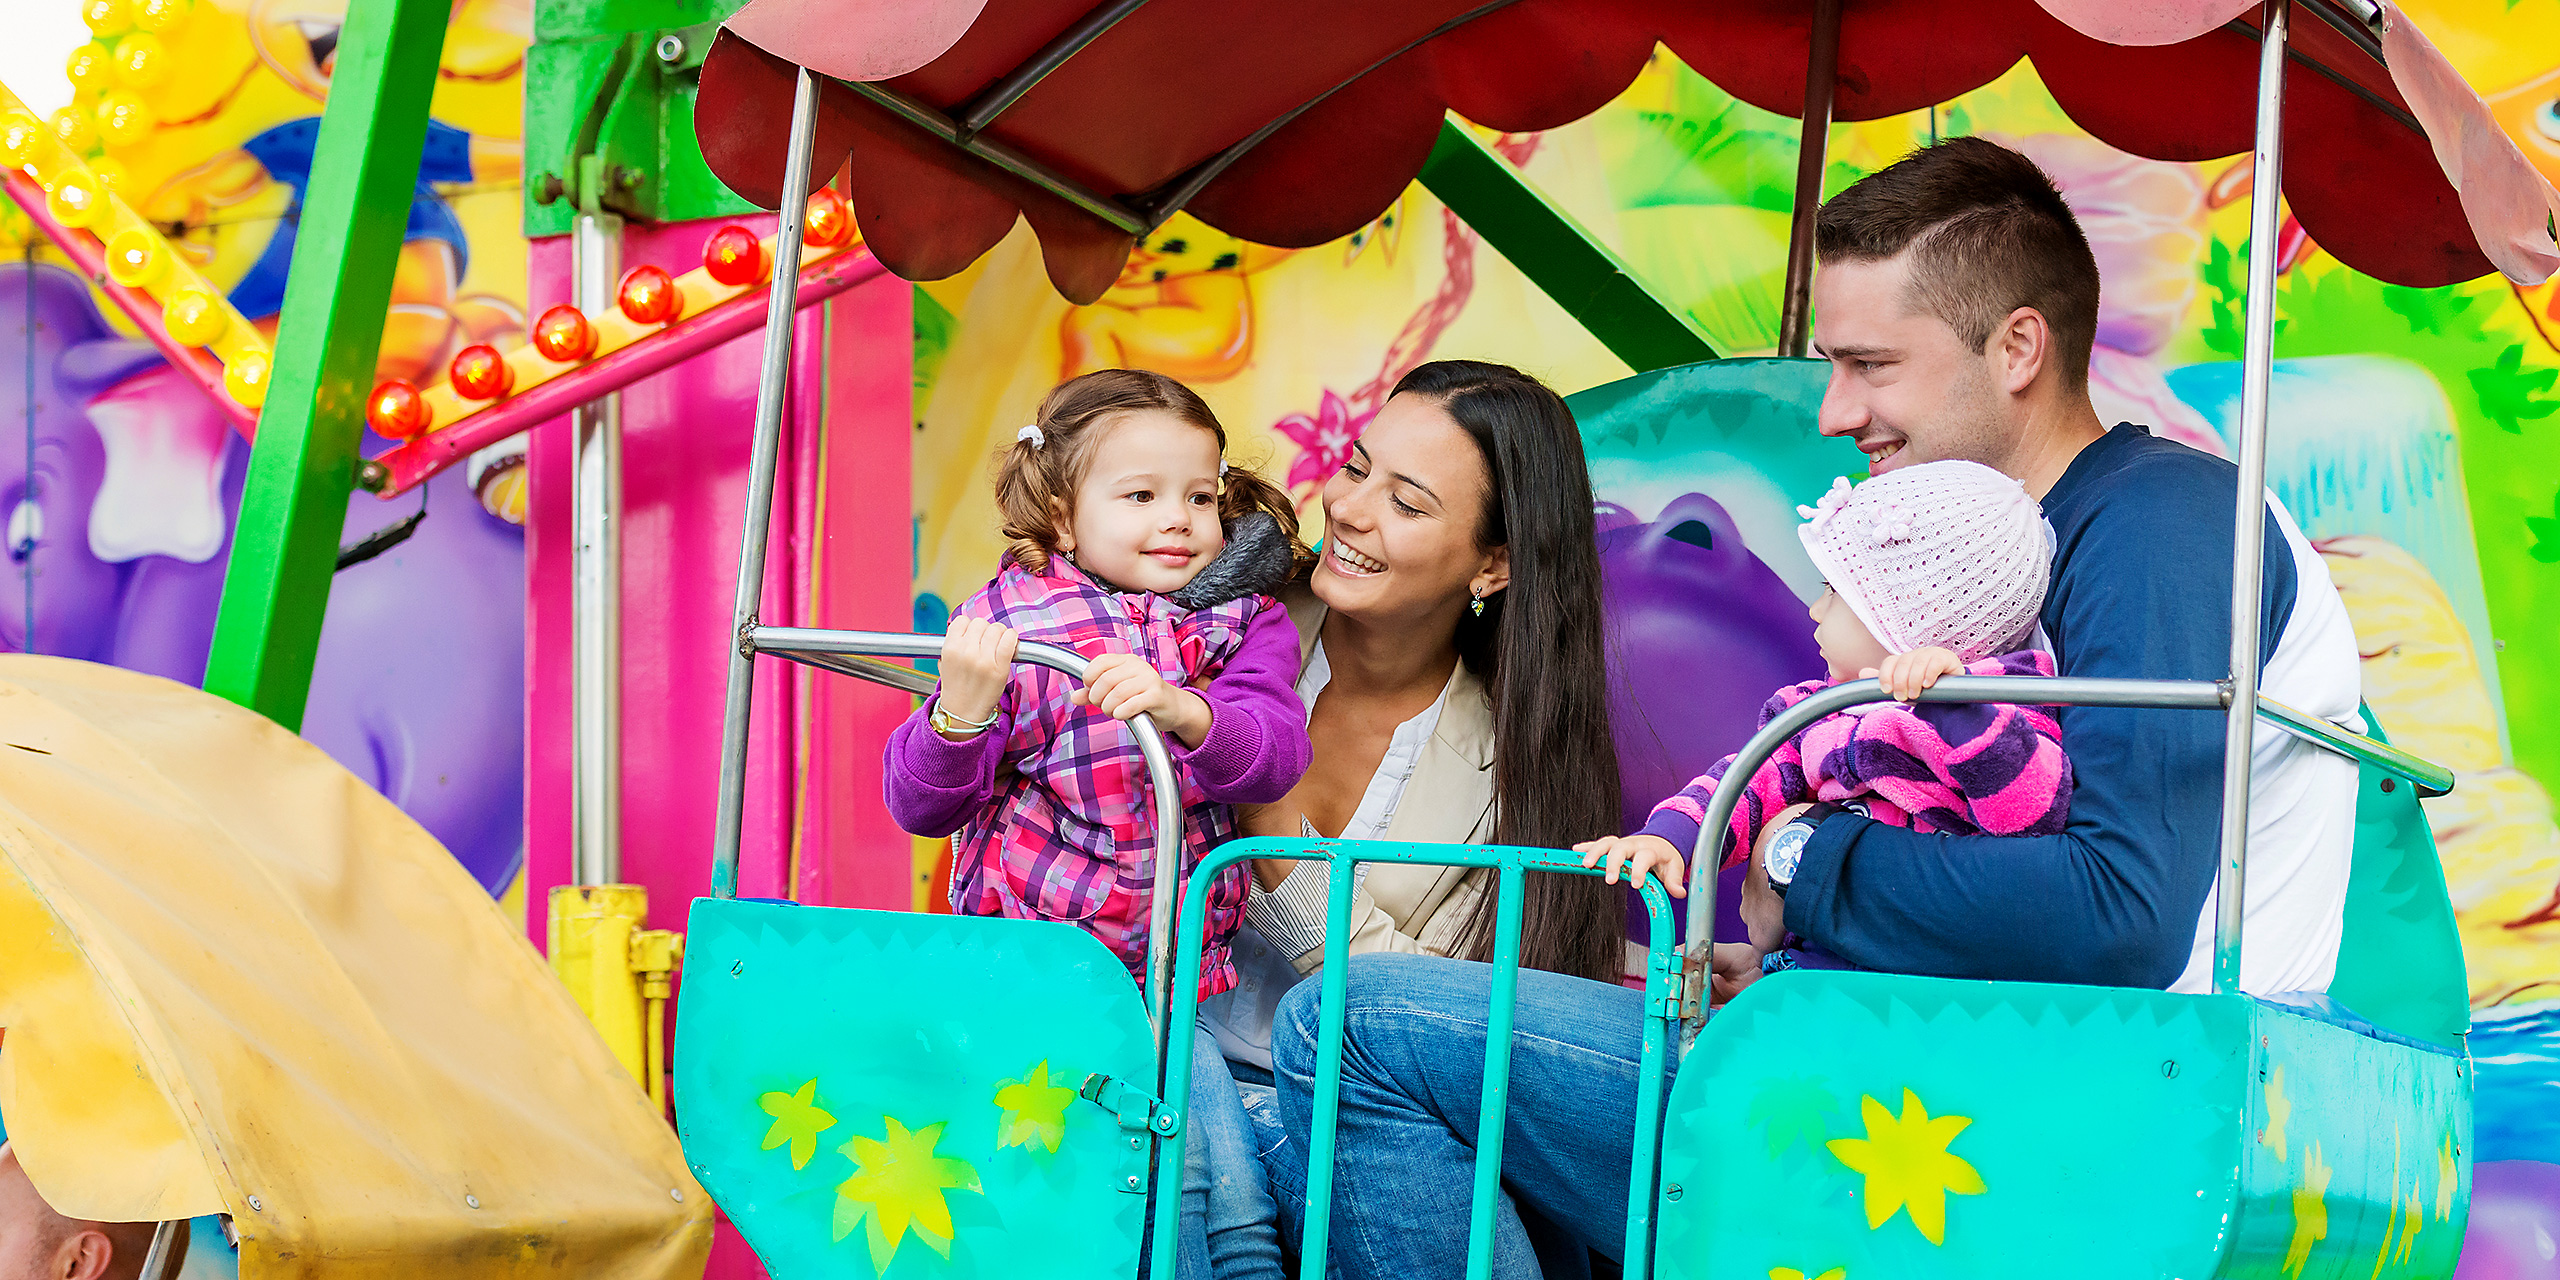 Enjoy Theme Park Rides With Your Kids!